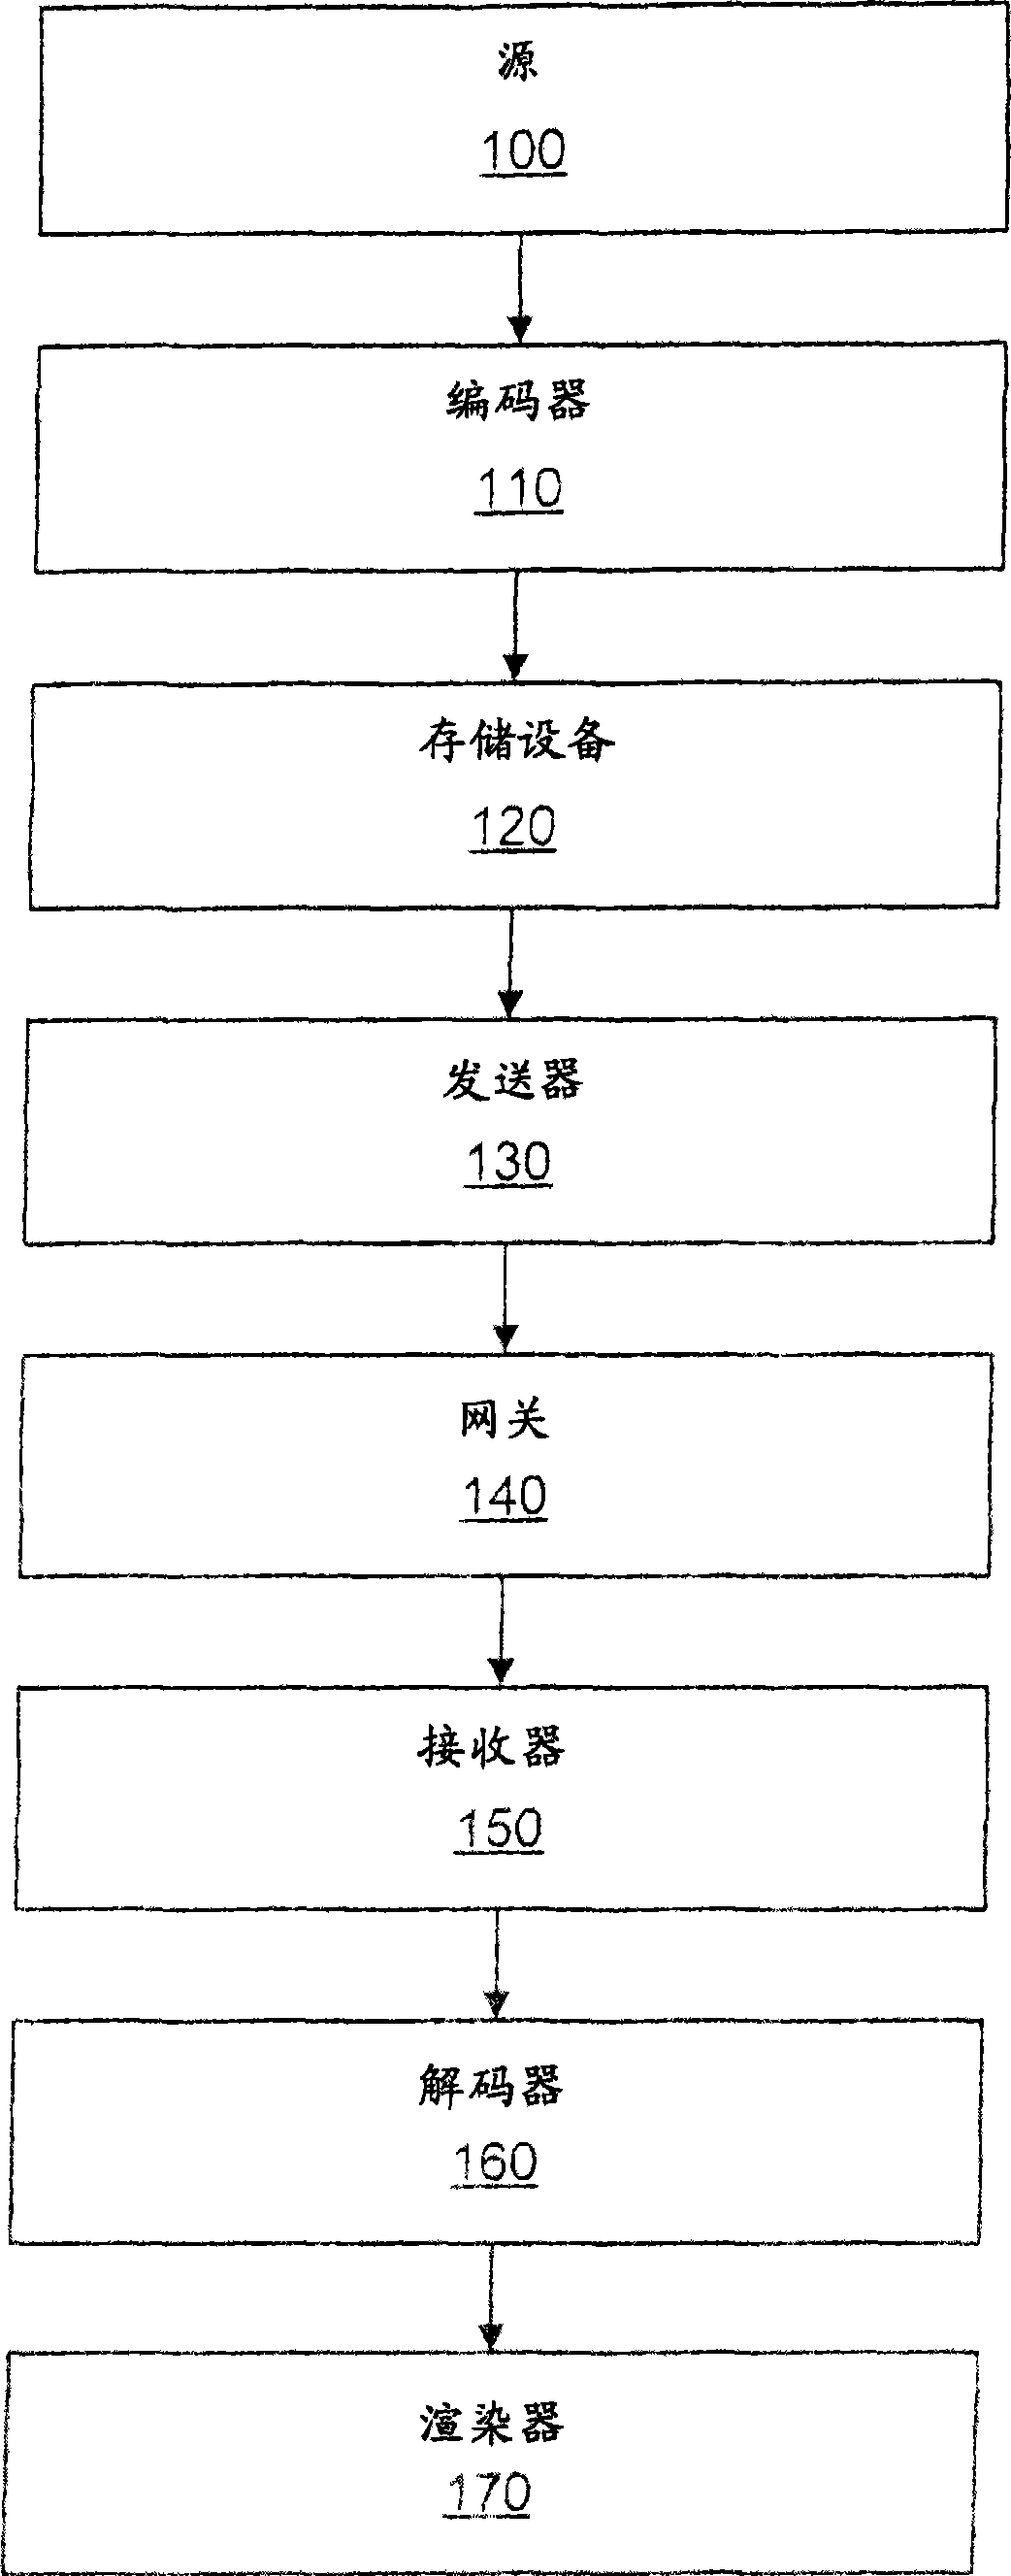 System and method for providing picture output indications in video coding